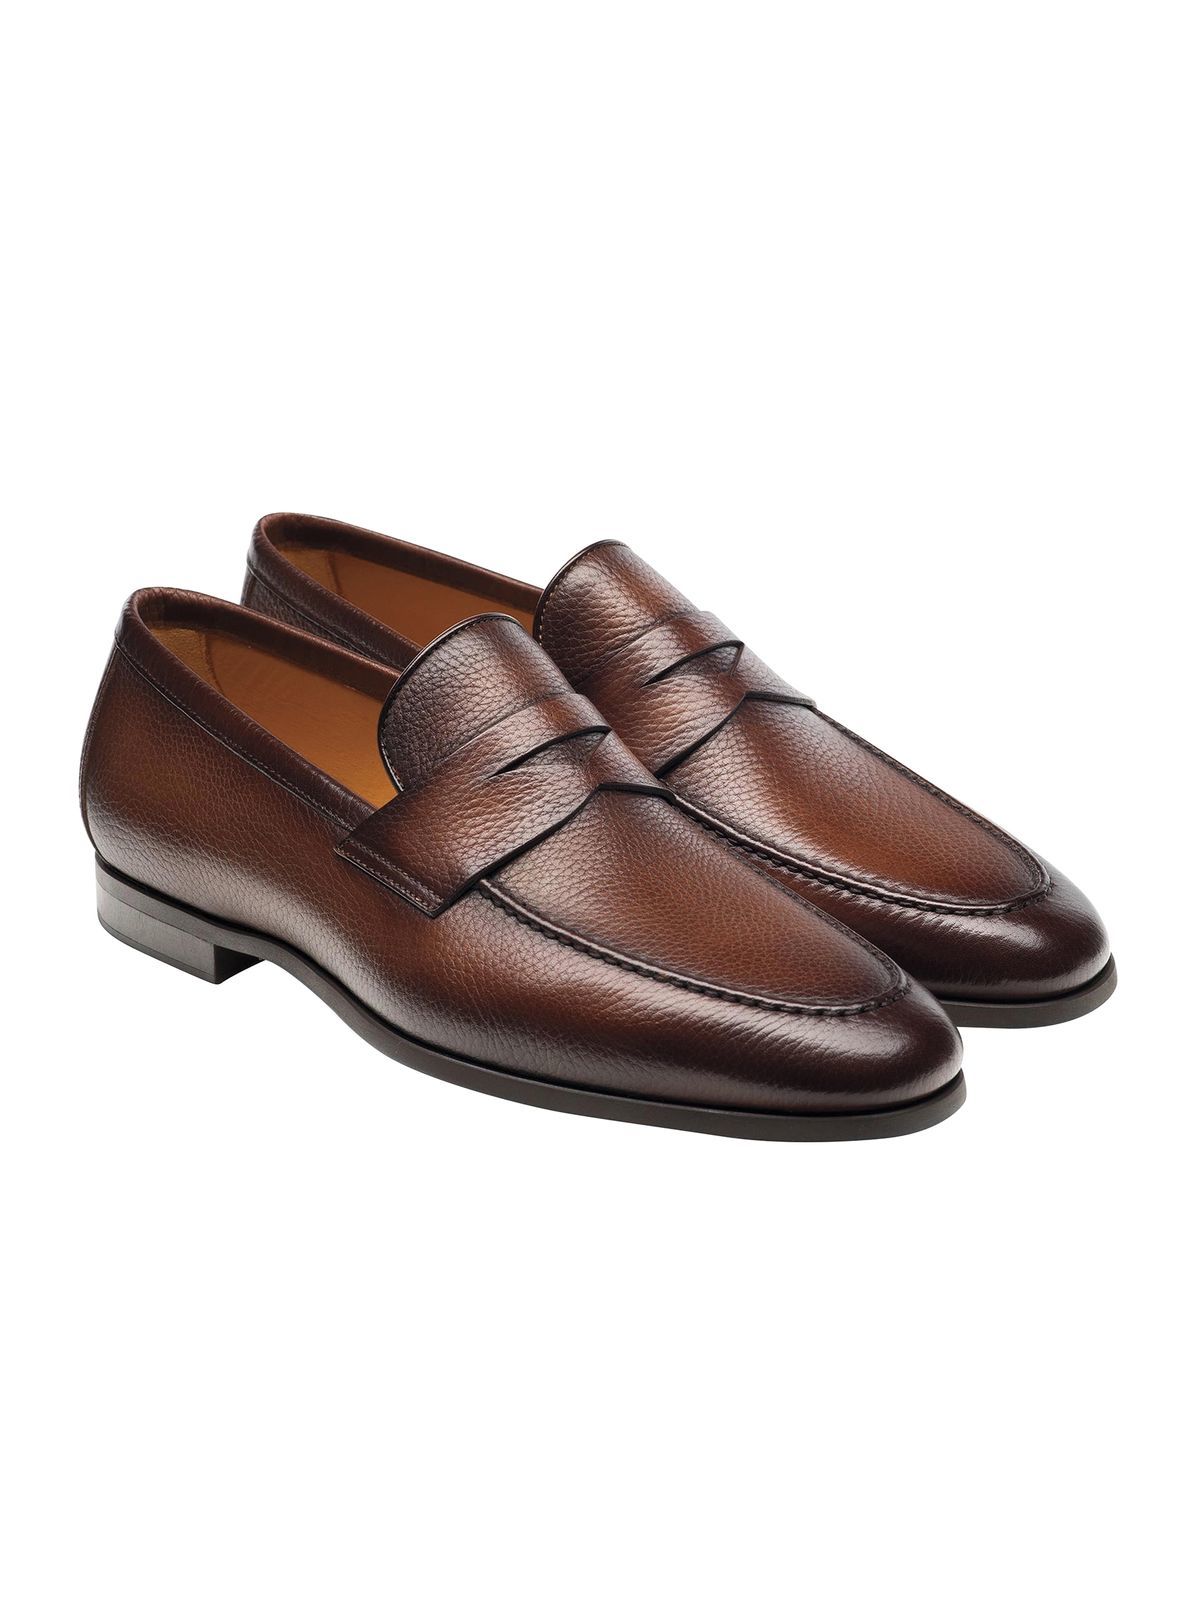 Diezma Luxe Slip-ons by Magnanni - Maus & Hoffman